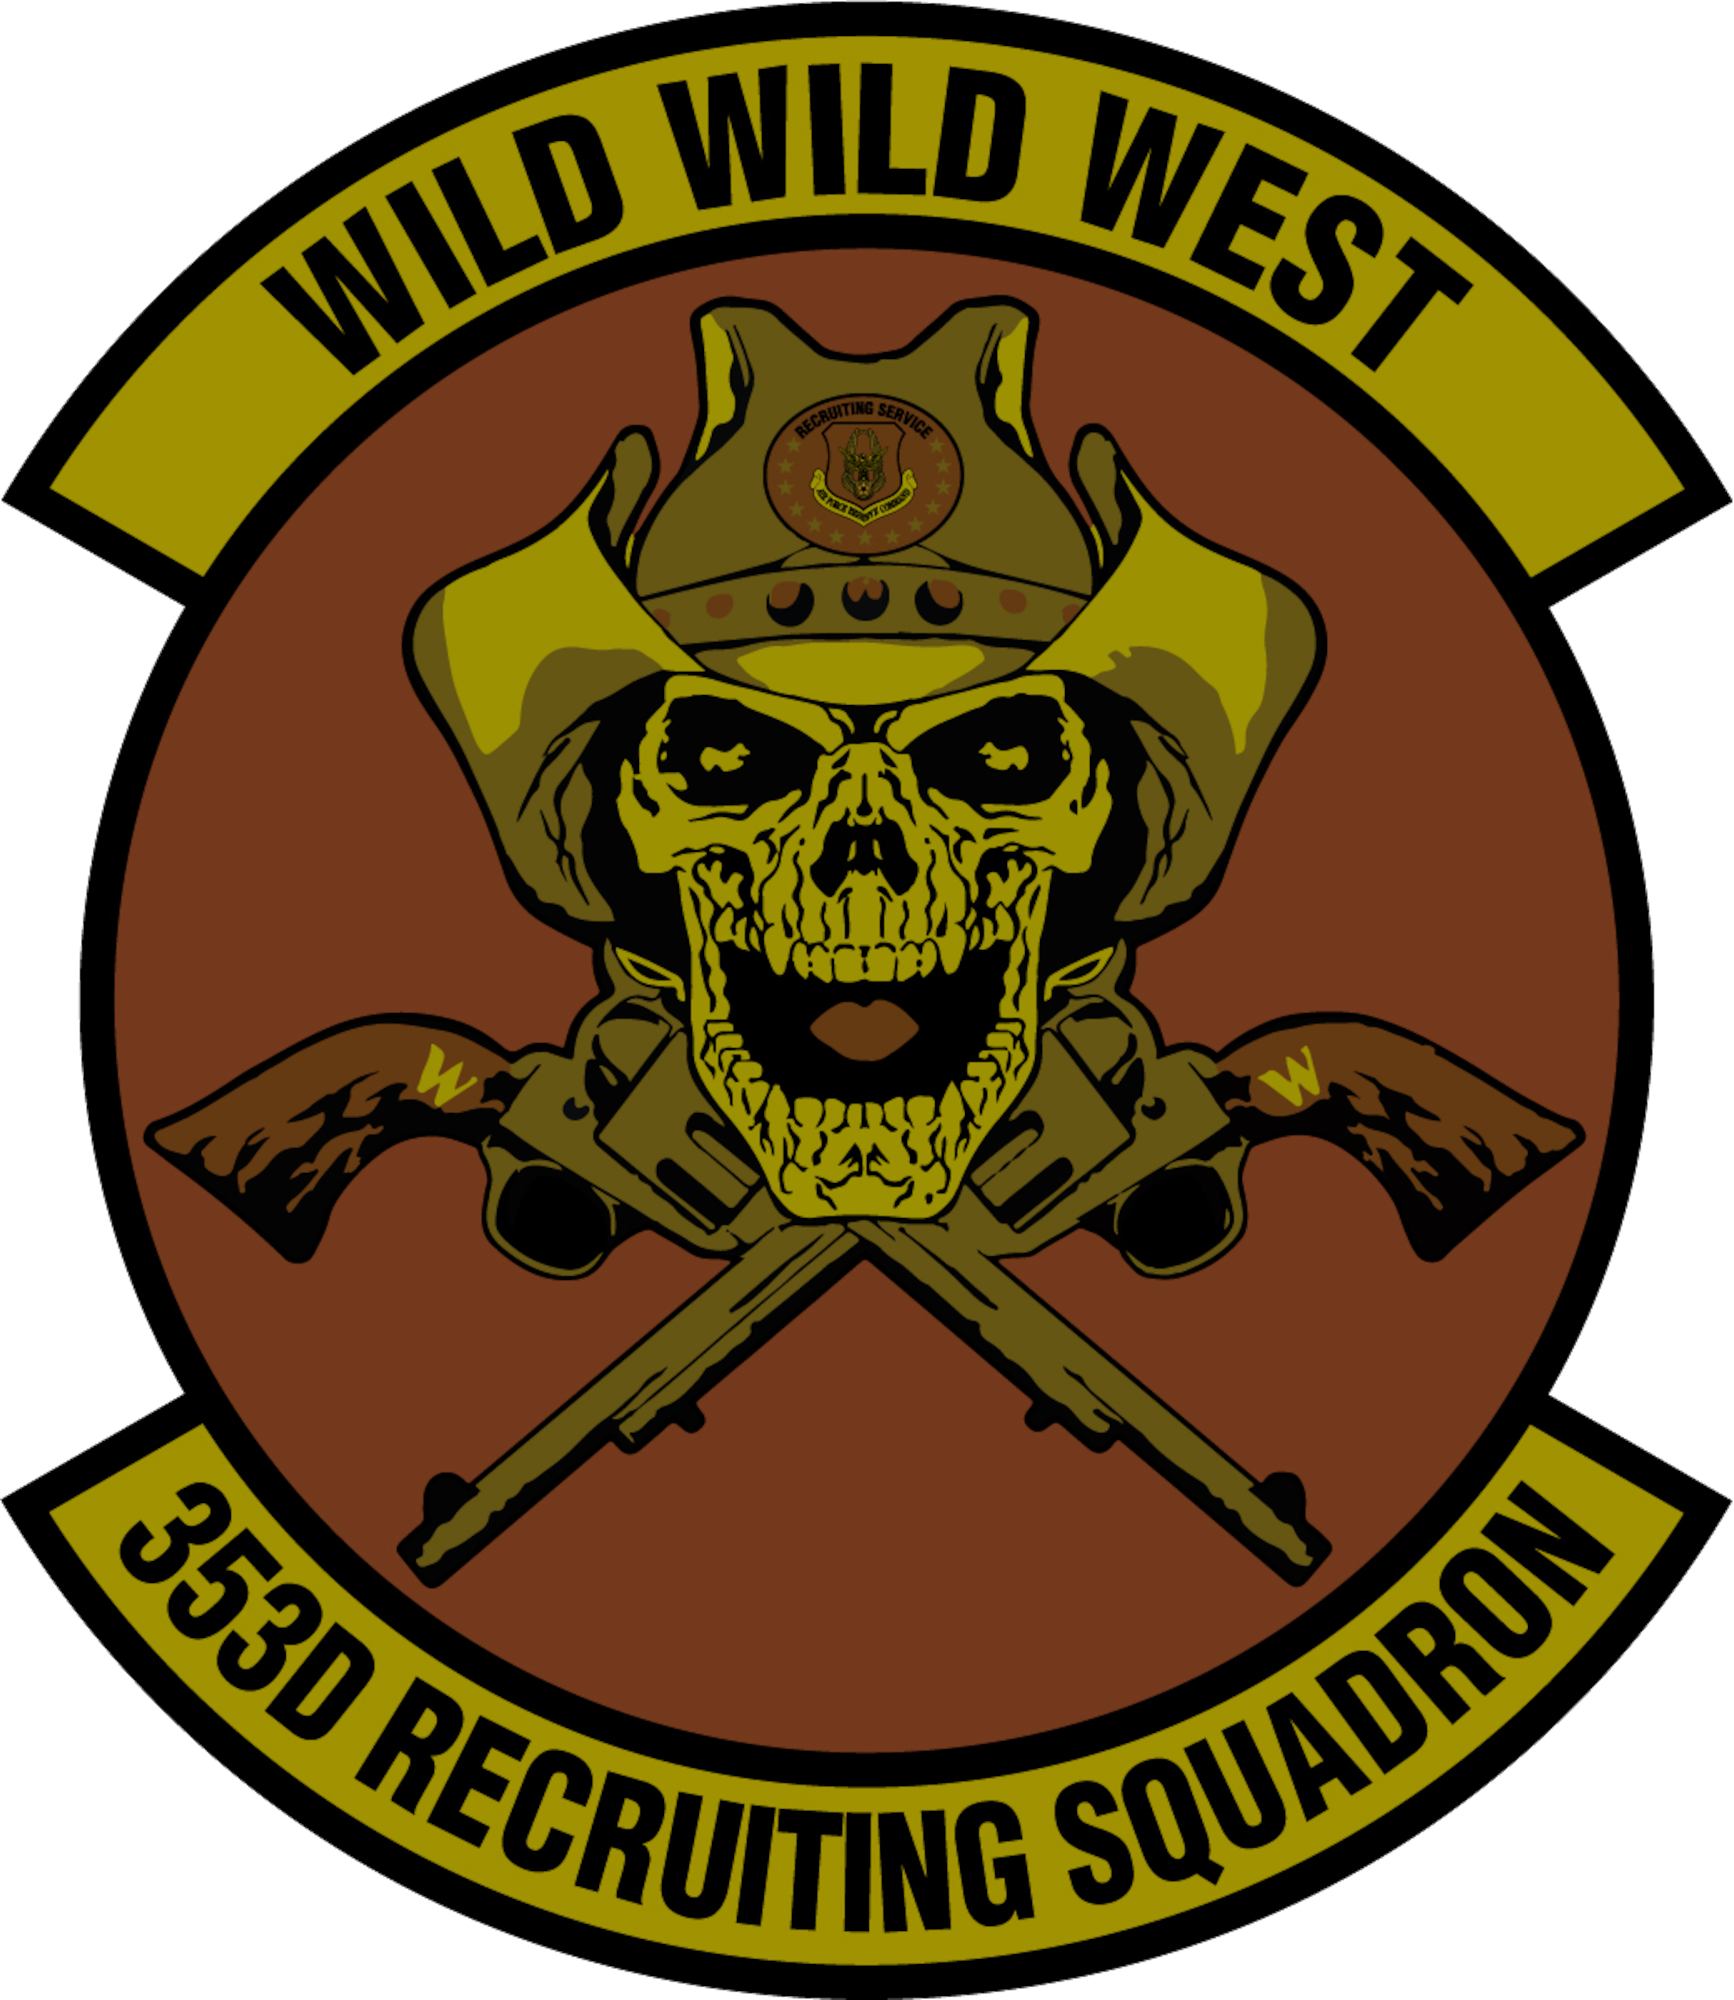 353rd Recruiting Squadron patch logo